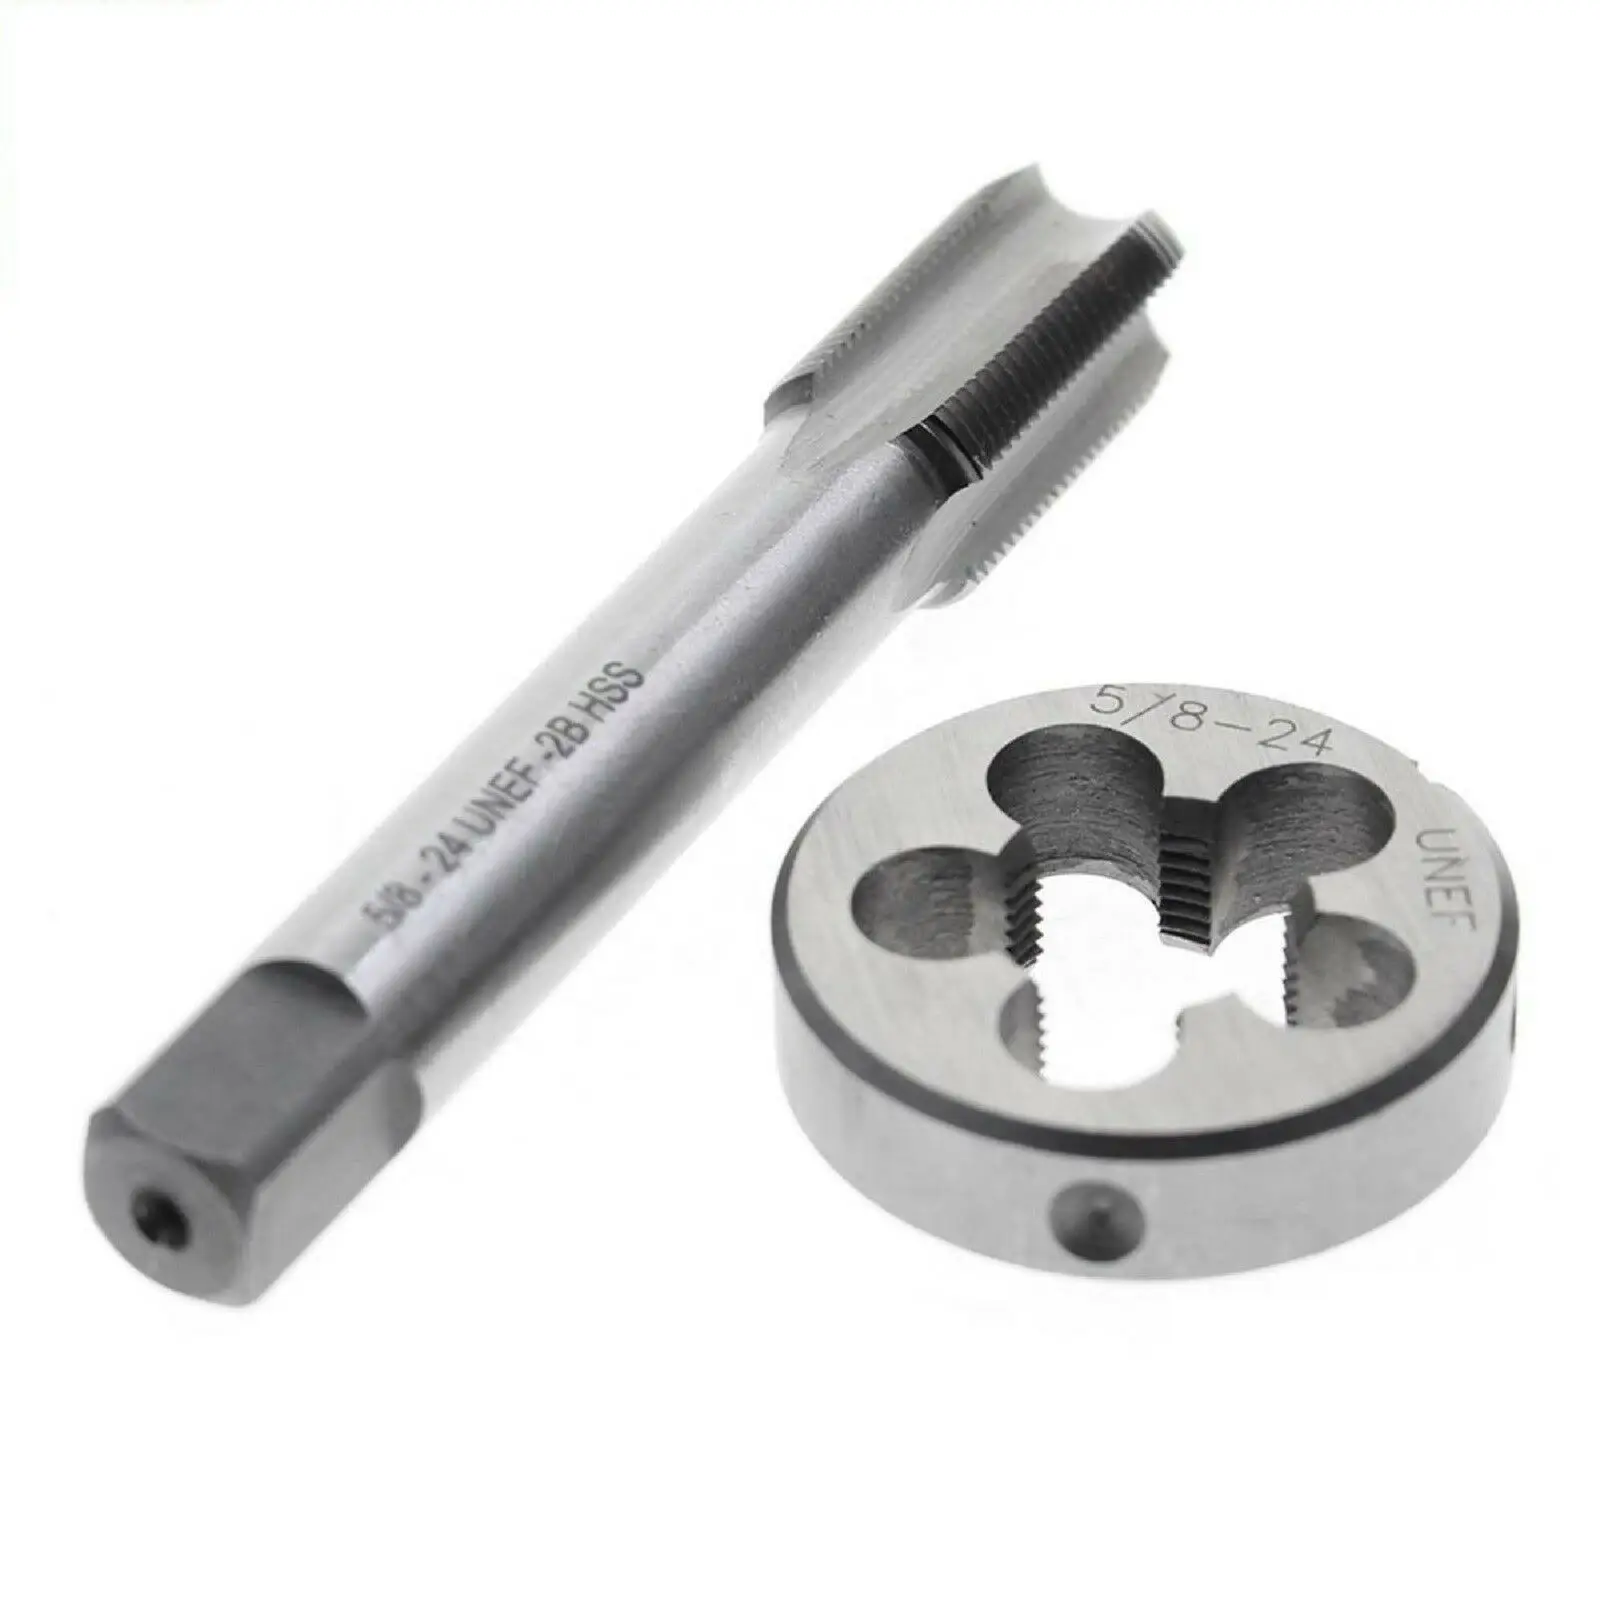 HSS 5/8 Inch-24 UNEF Metric Trapezoidal Right Hand Thread Tap And Die Set New 5/8x24 Hand Tap Drill Bit